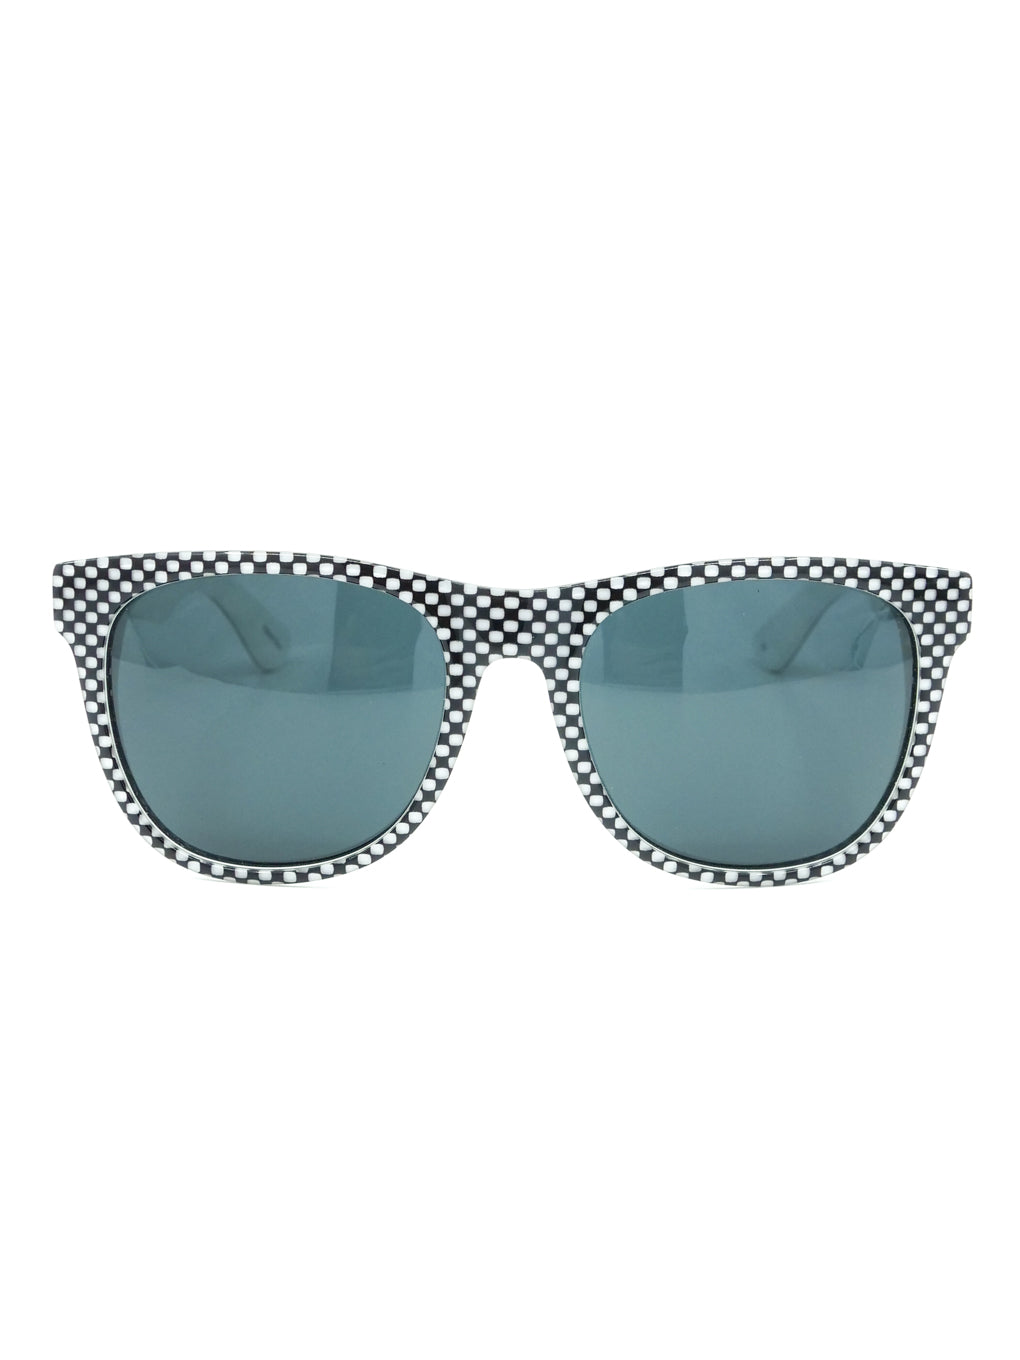 Mosely Tribes x Free City Checkered Wayfarer Sunglasses